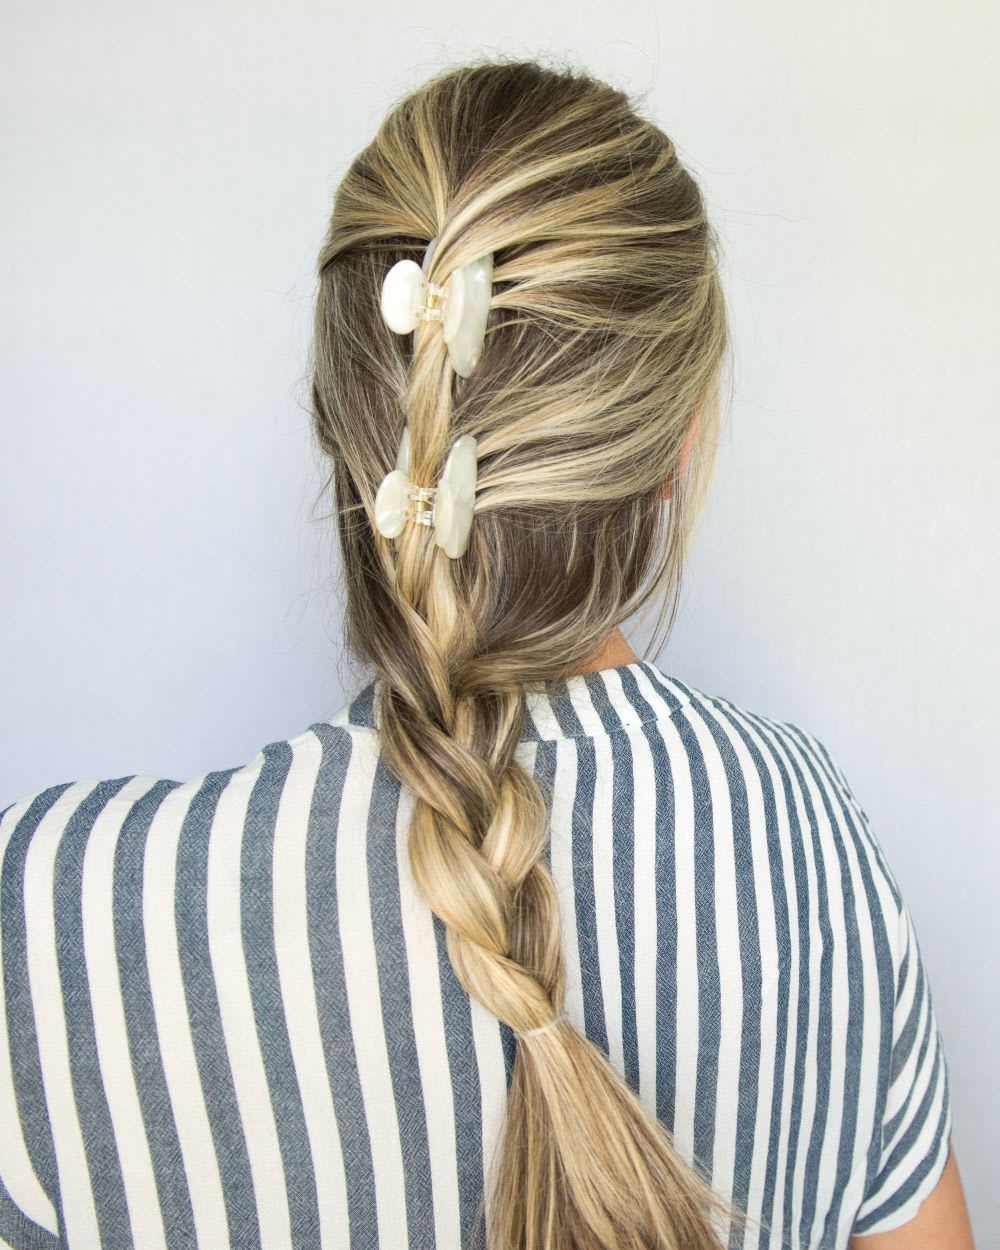 How To Wear the Hair Barrette Trend - Pursuing Pretty